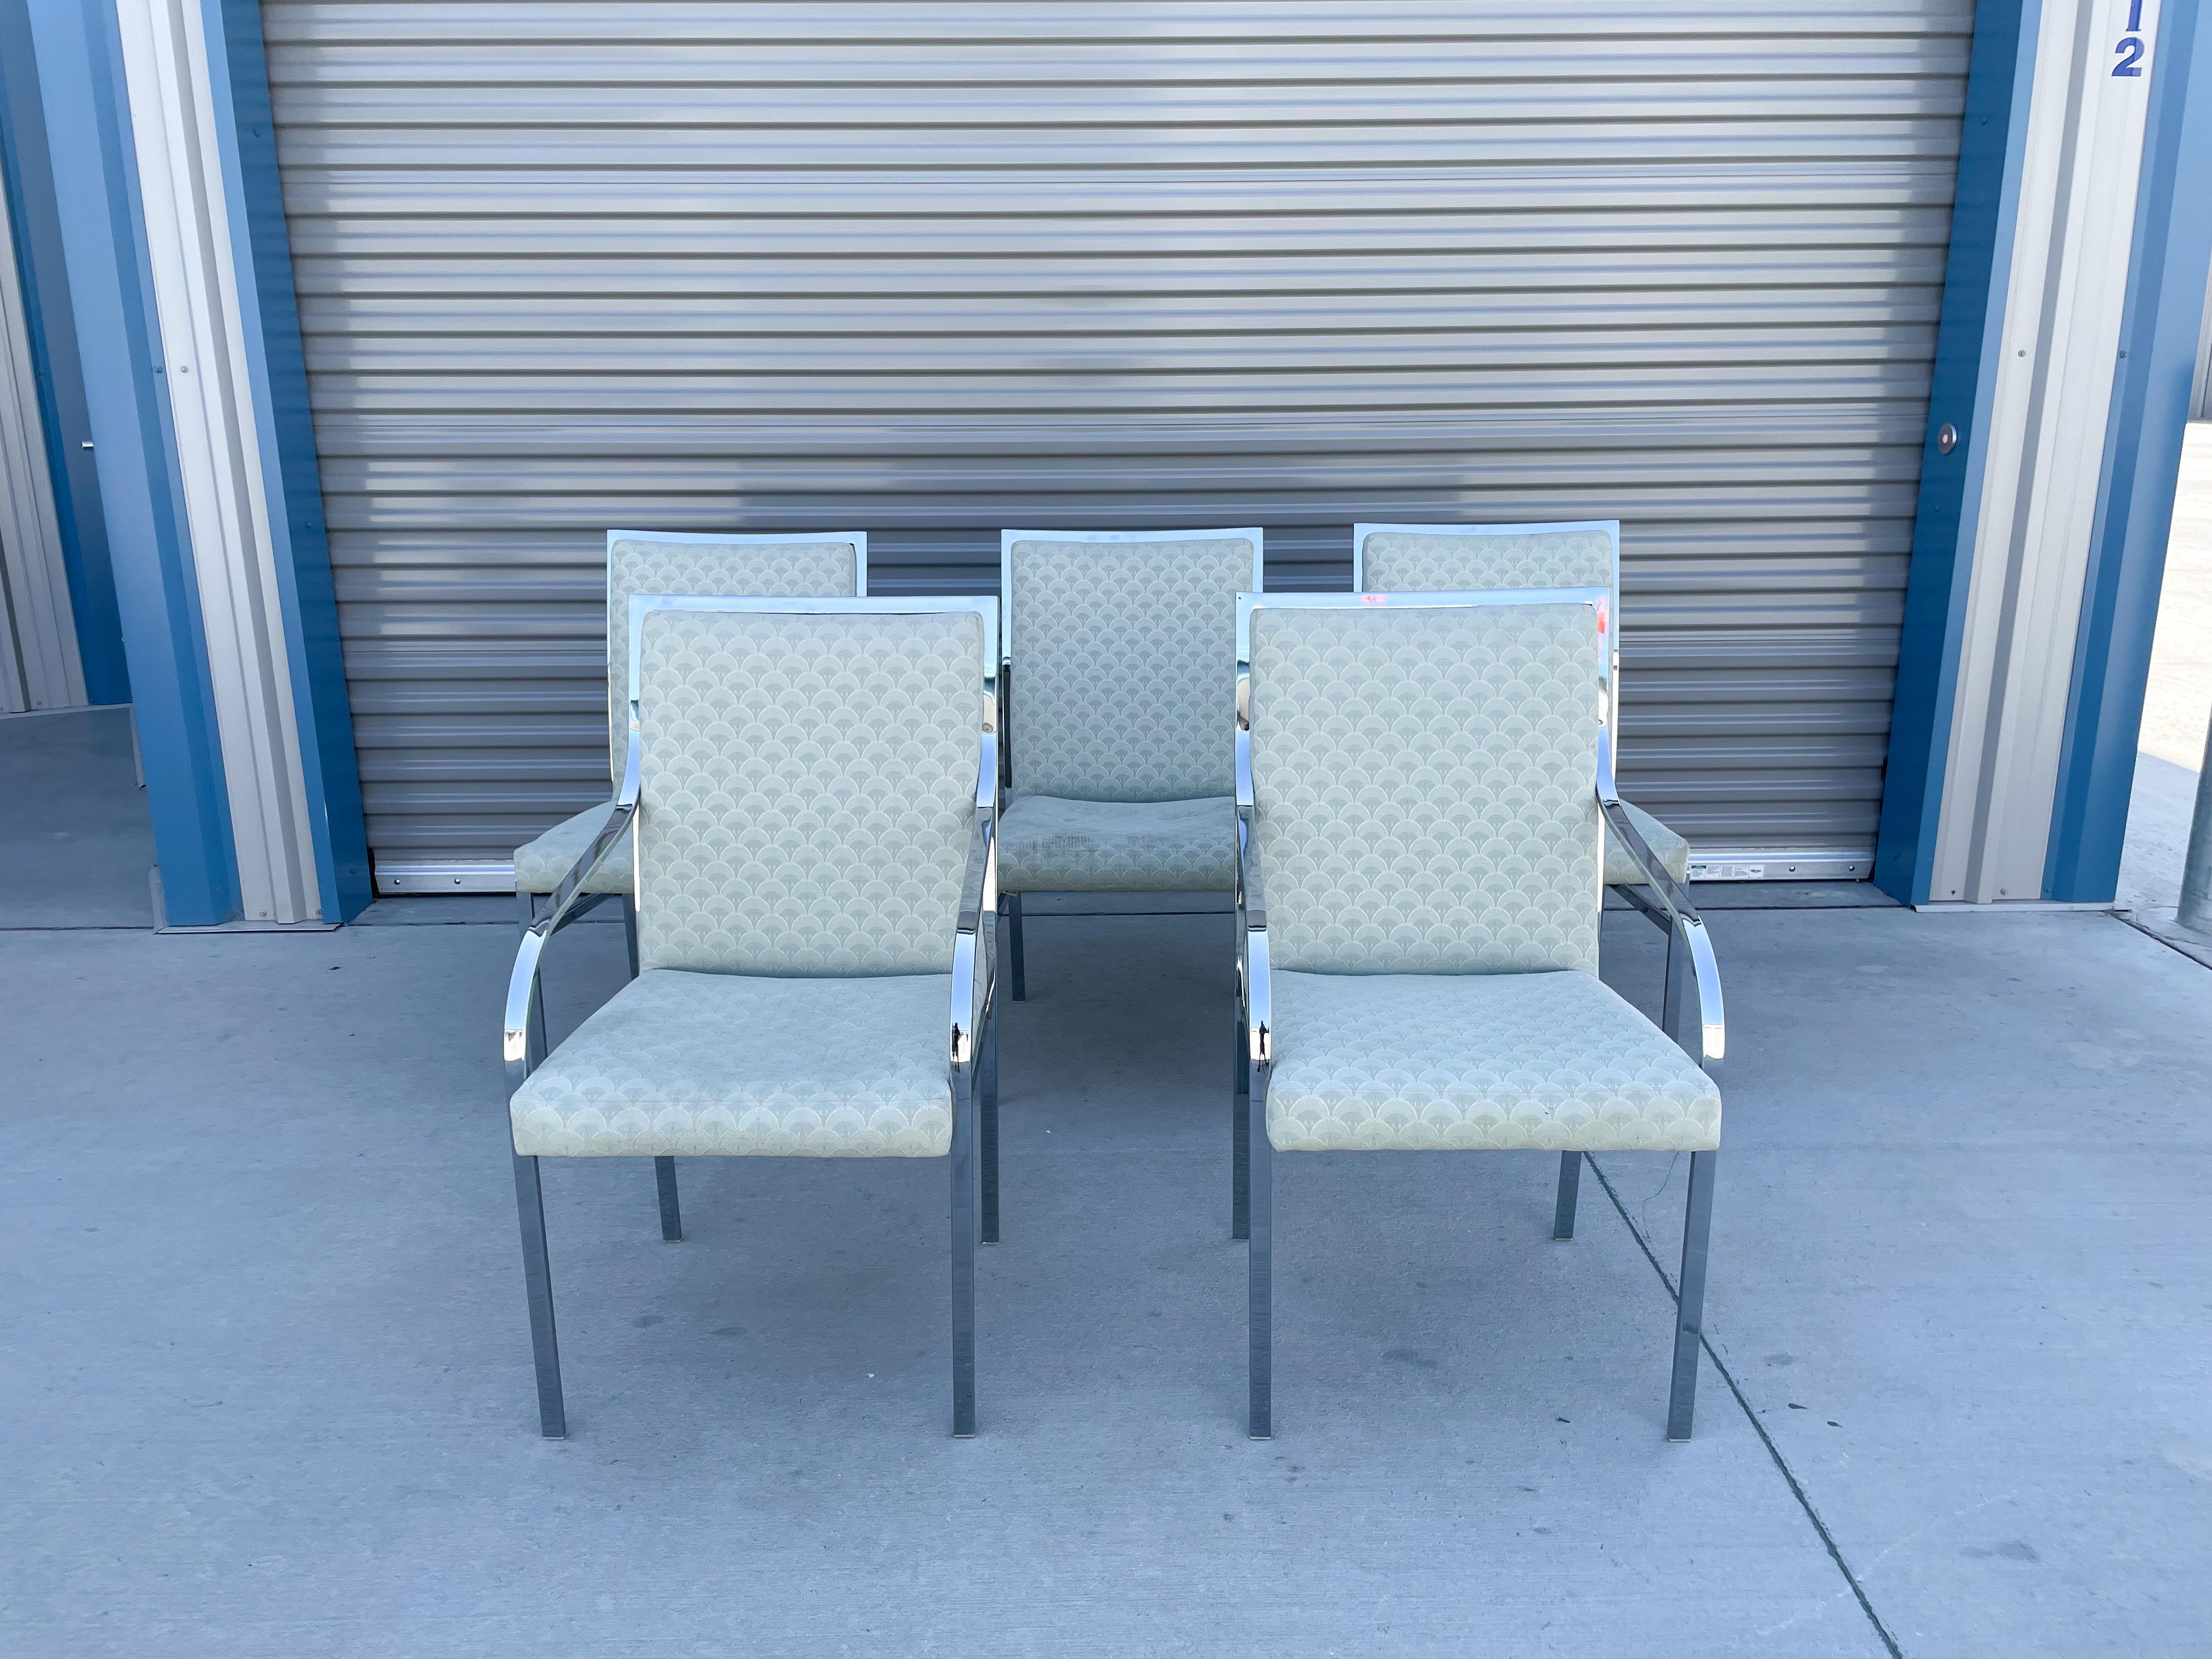 Midcentury chrome dining chair set of six by Pierre Cardin for Dillingham. These vintage chrome dining chairs were design by Pierre Cardin for Dillingham and manufactured in the United States. They feature a perfect stainless steel chrome base with